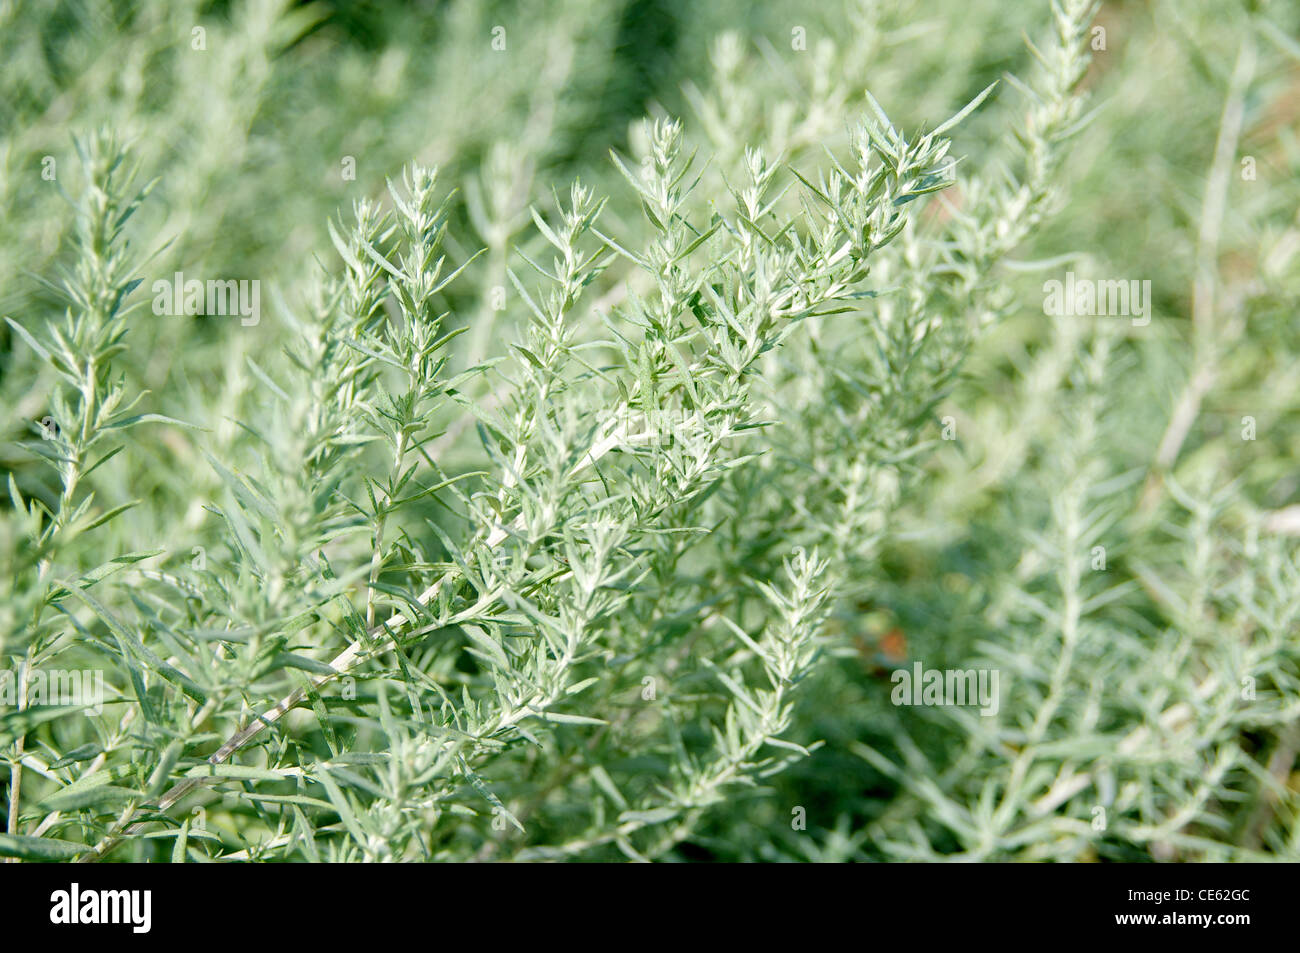 Branches of the Artemisia ludoviciana, a species of sagebrush. A popular ornamental plant because of the silvery foliage. Stock Photo